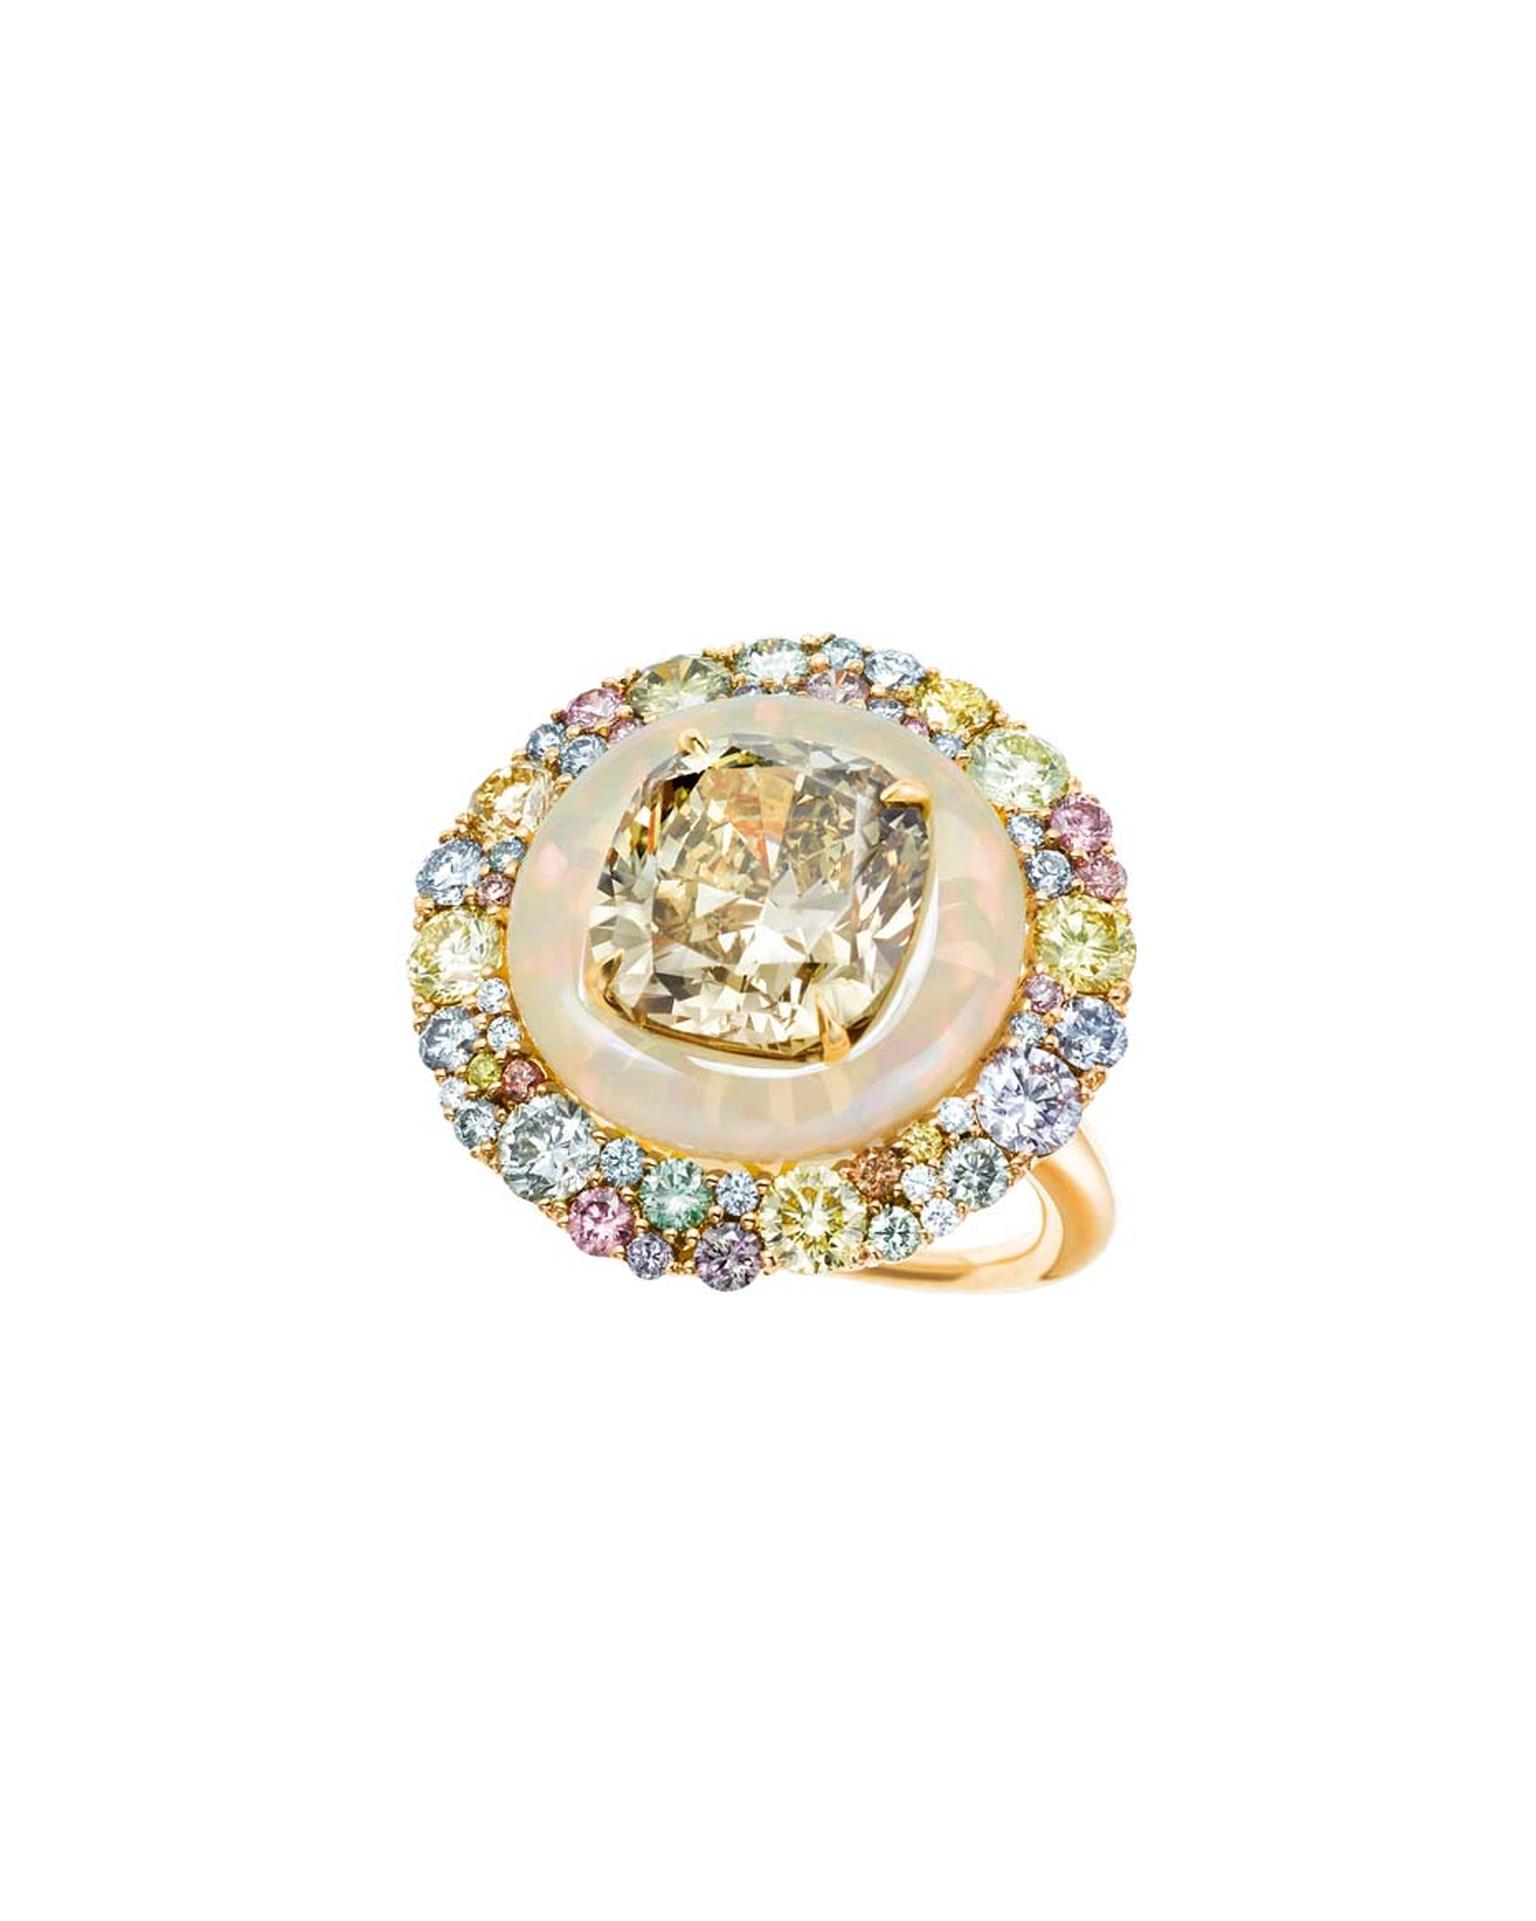 The deep brownish greenish yellow diamond in Tiffany & Co.'s ring is inlaid into an opal encircled by a swath of coloured diamonds.